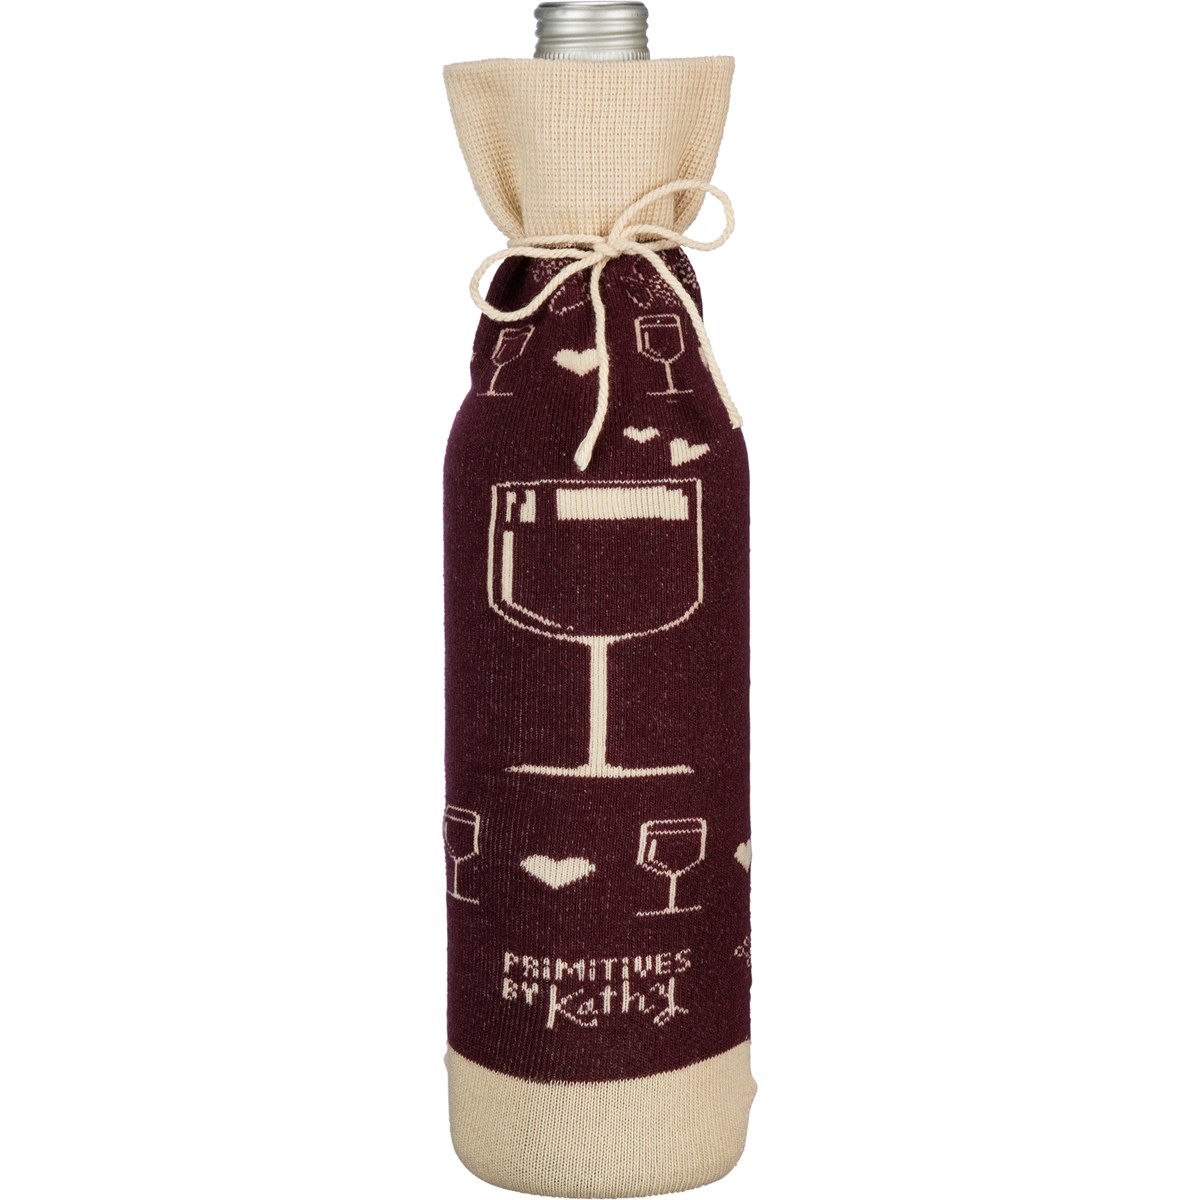 This Wine Pairs Well With Love Bottle Sock - Cotton, Nylon, Spandex